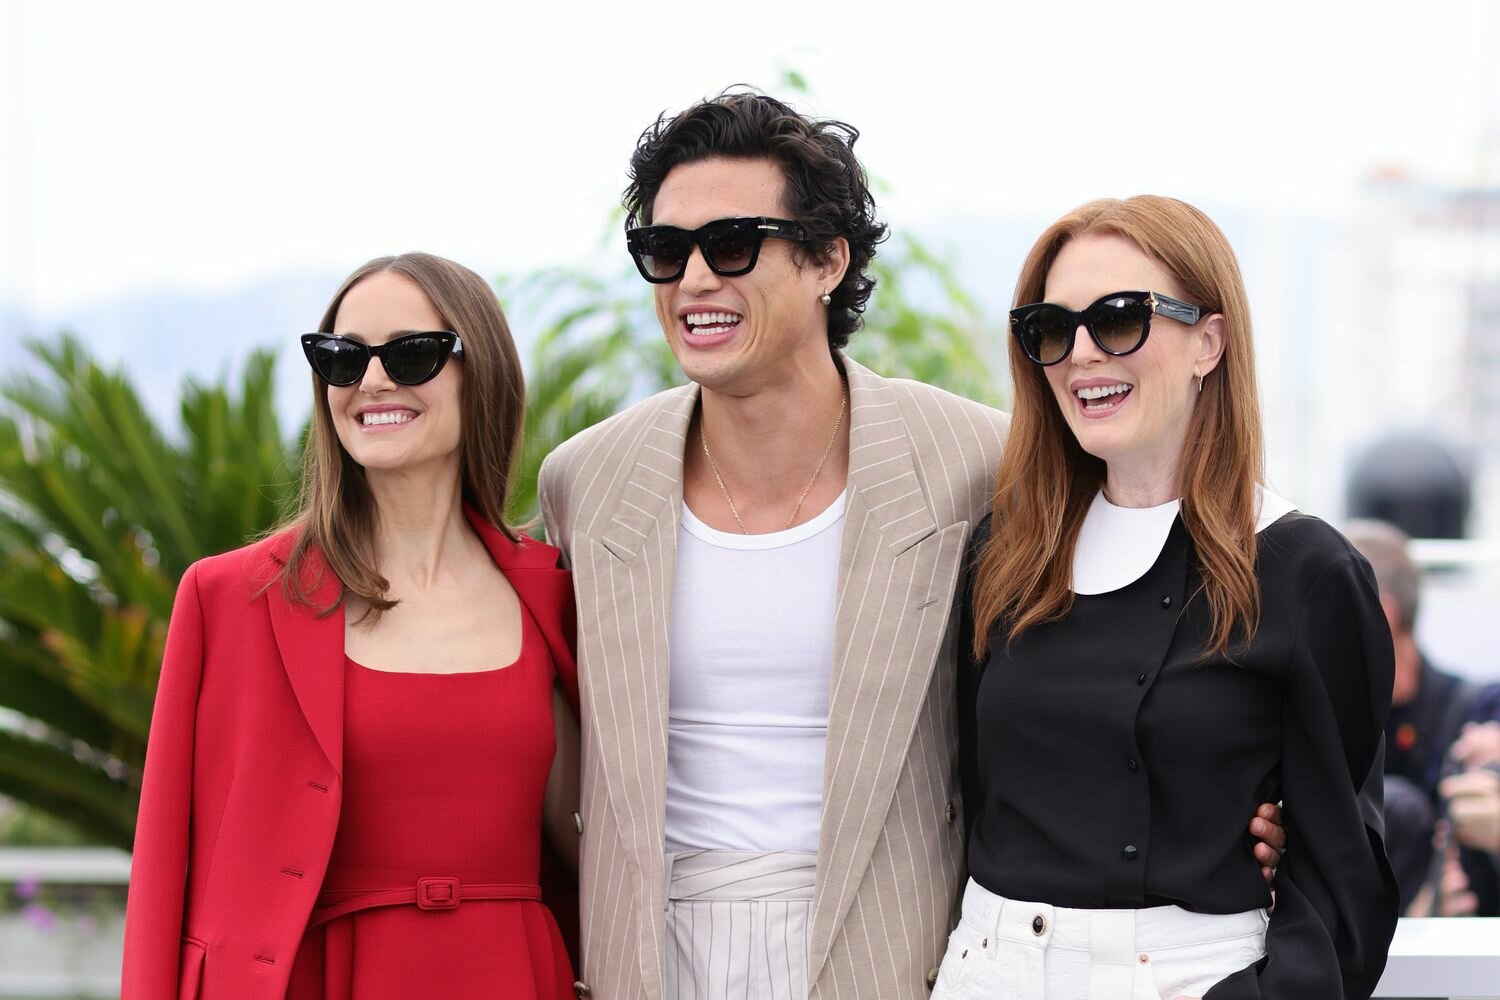 Natalie Portman, Charles Melton and Julianne Moore attend the "May December" photocall at the 76th annual Cannes film festival